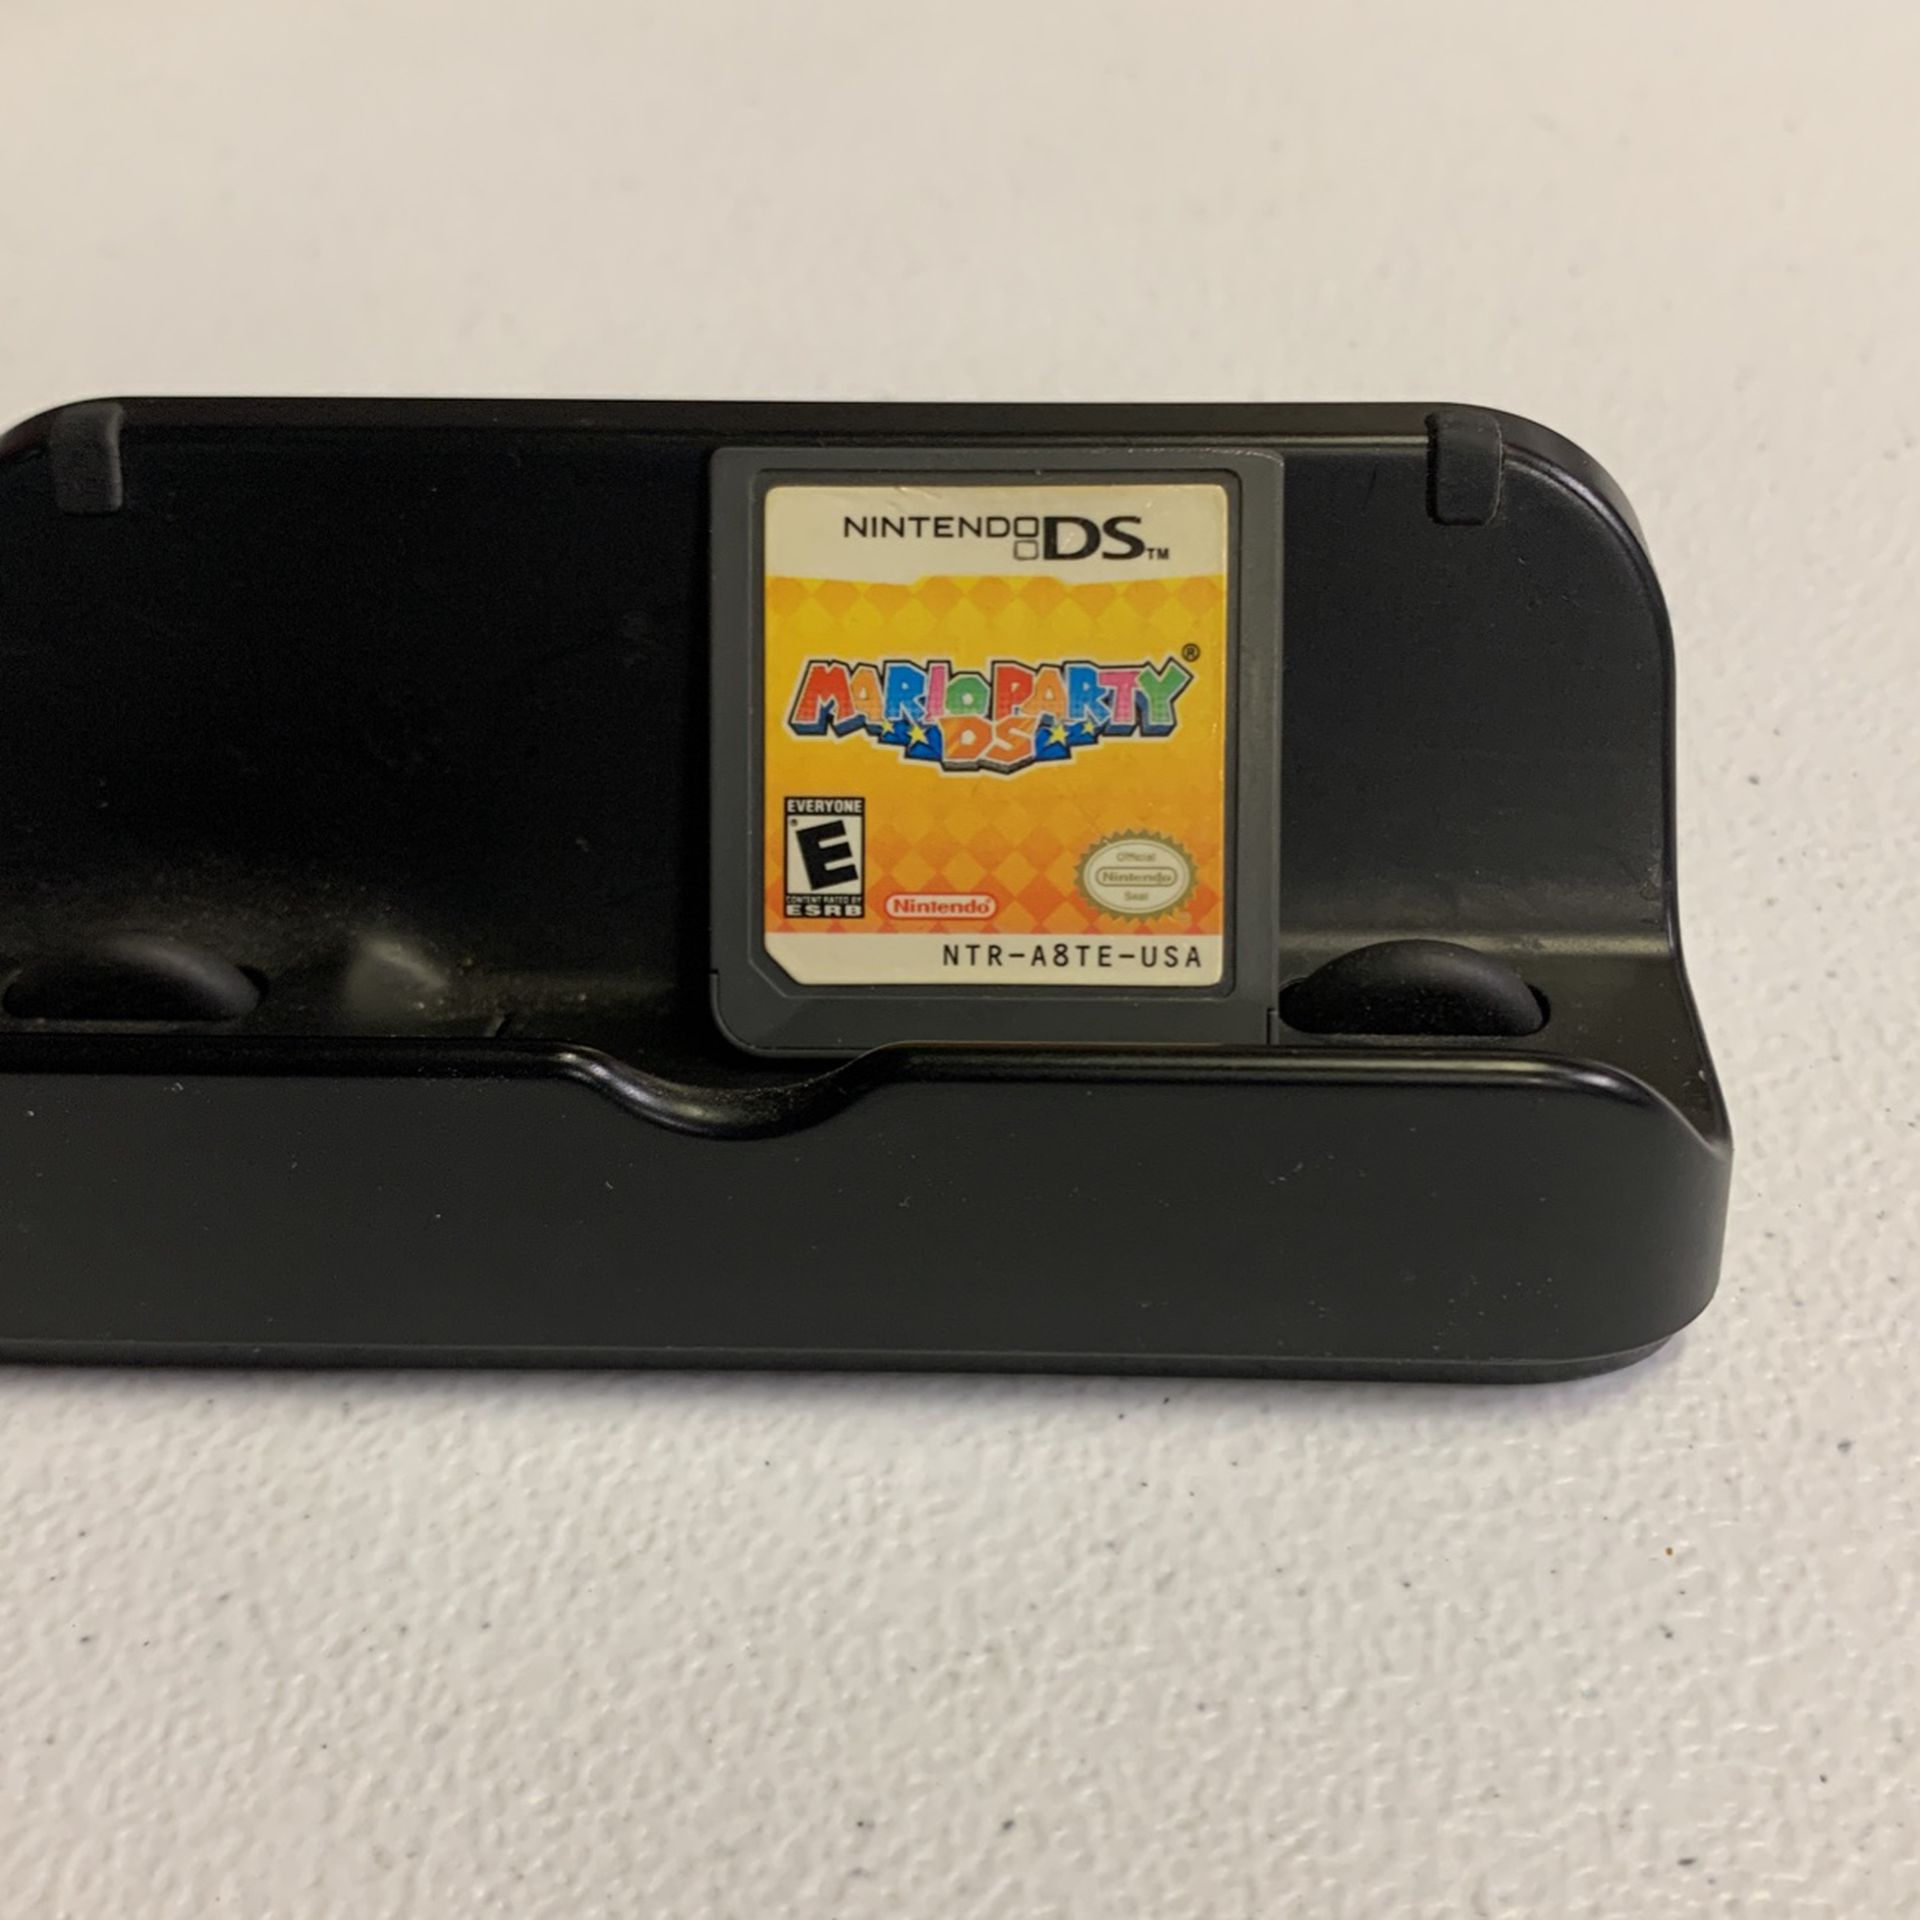 Mario Party DS - Nintendo DS - More Games on IG @DavidsGameLounge